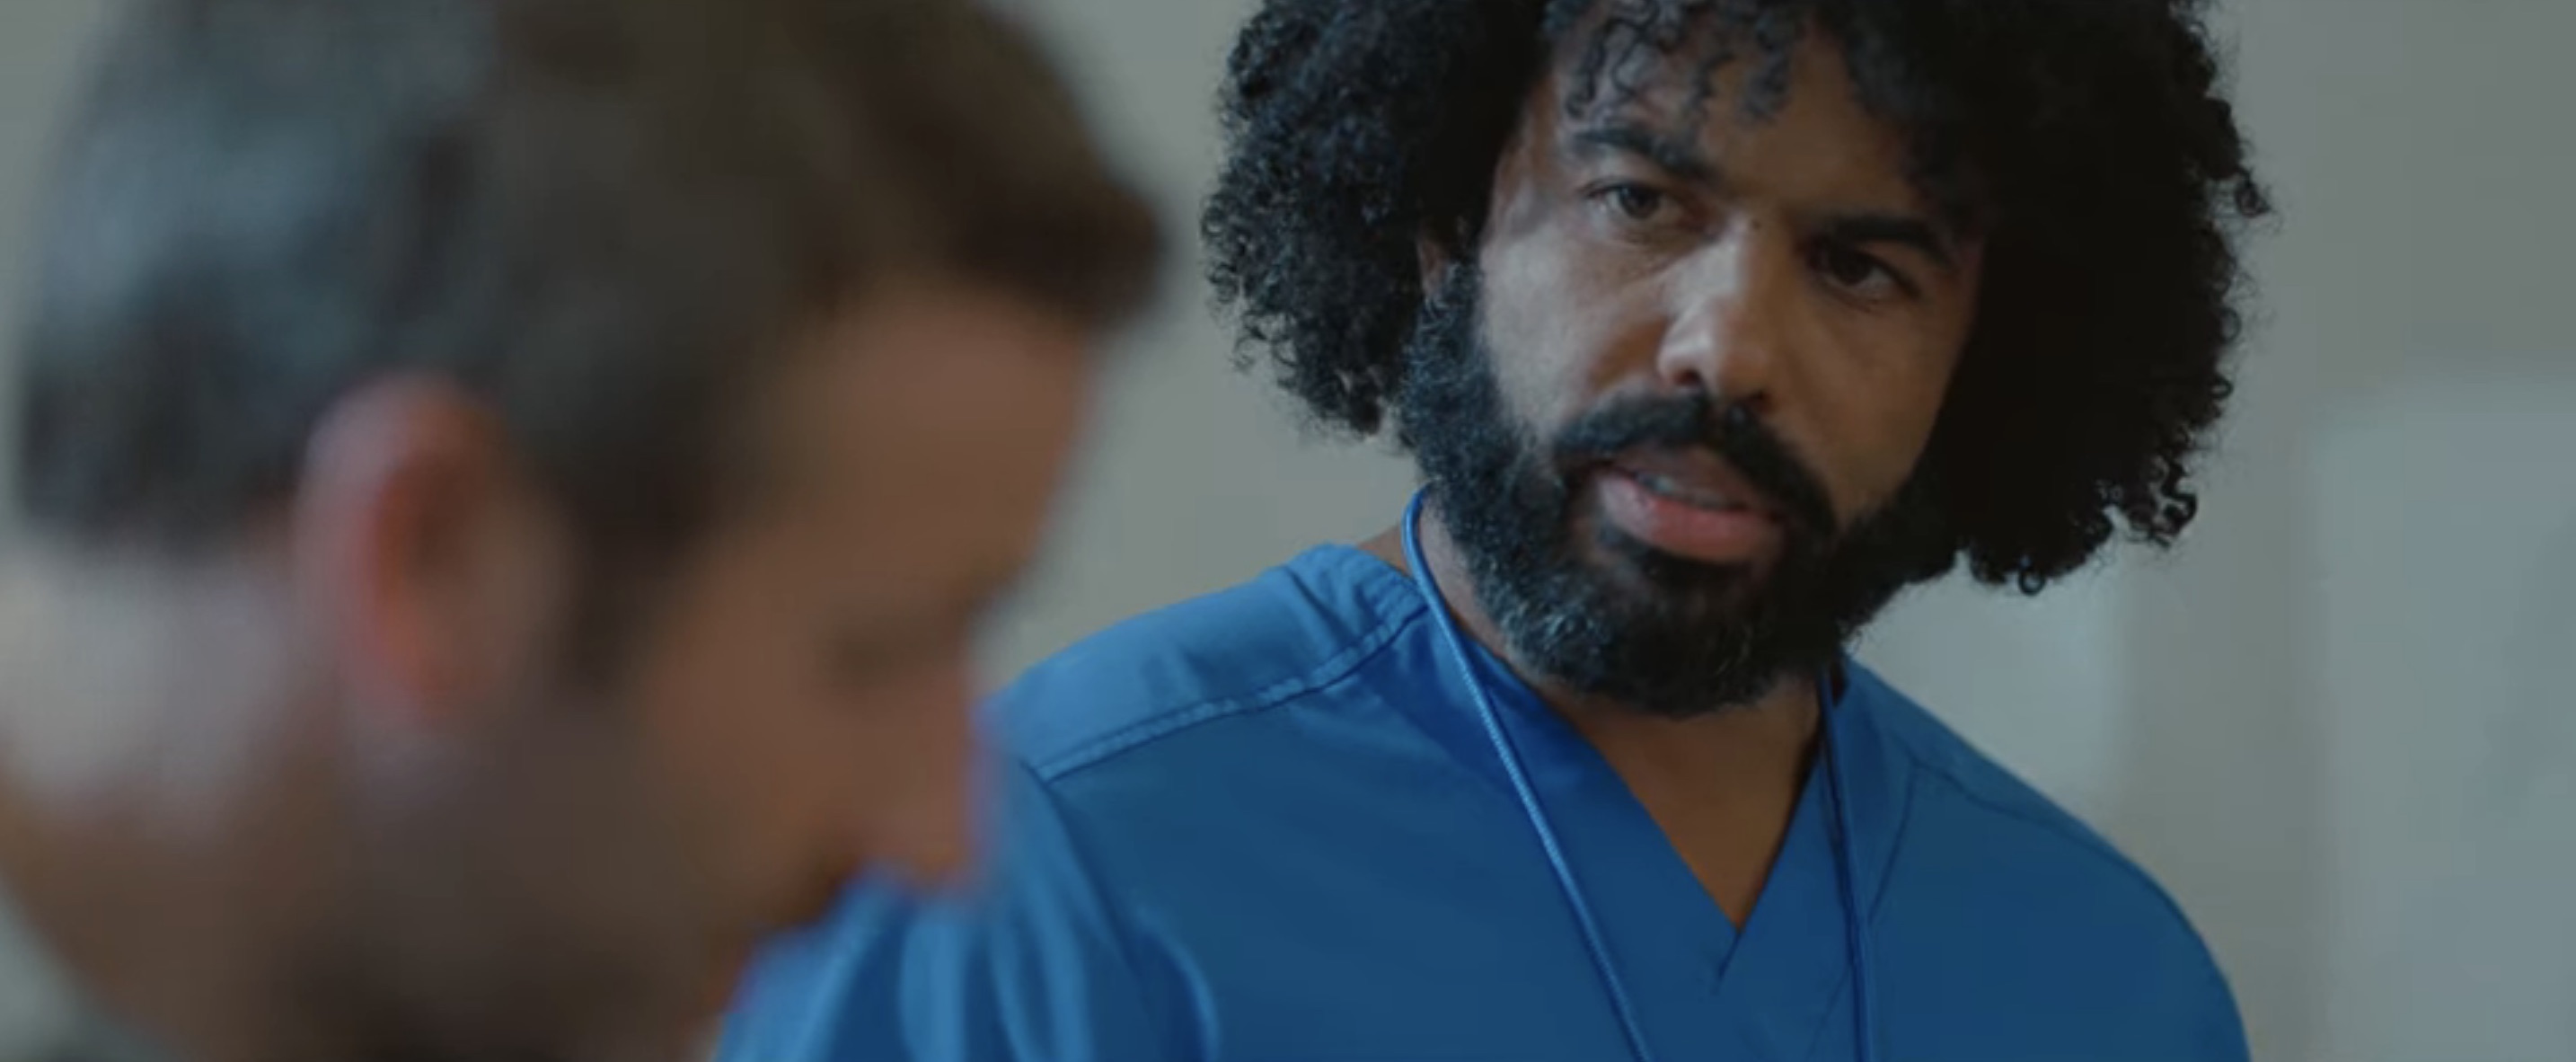 The Starling Cast - Daveed Diggs as Ben